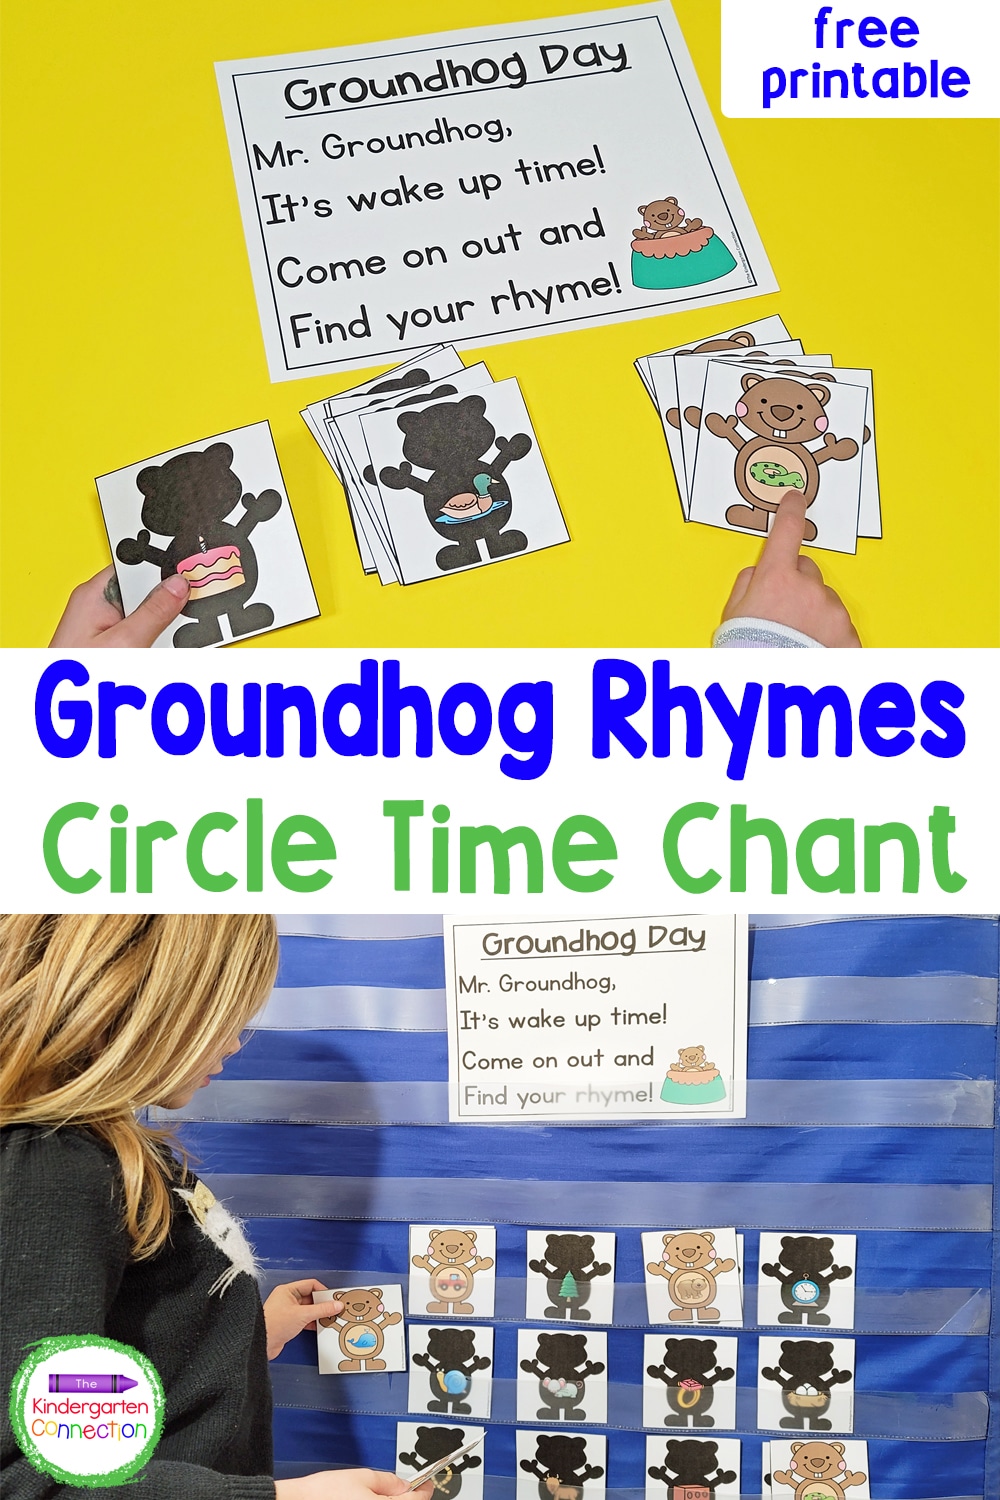 This free Groundhog Day Chant and Rhyming Match is the perfect way to celebrate Groundhog Day while working on rhyming skills!